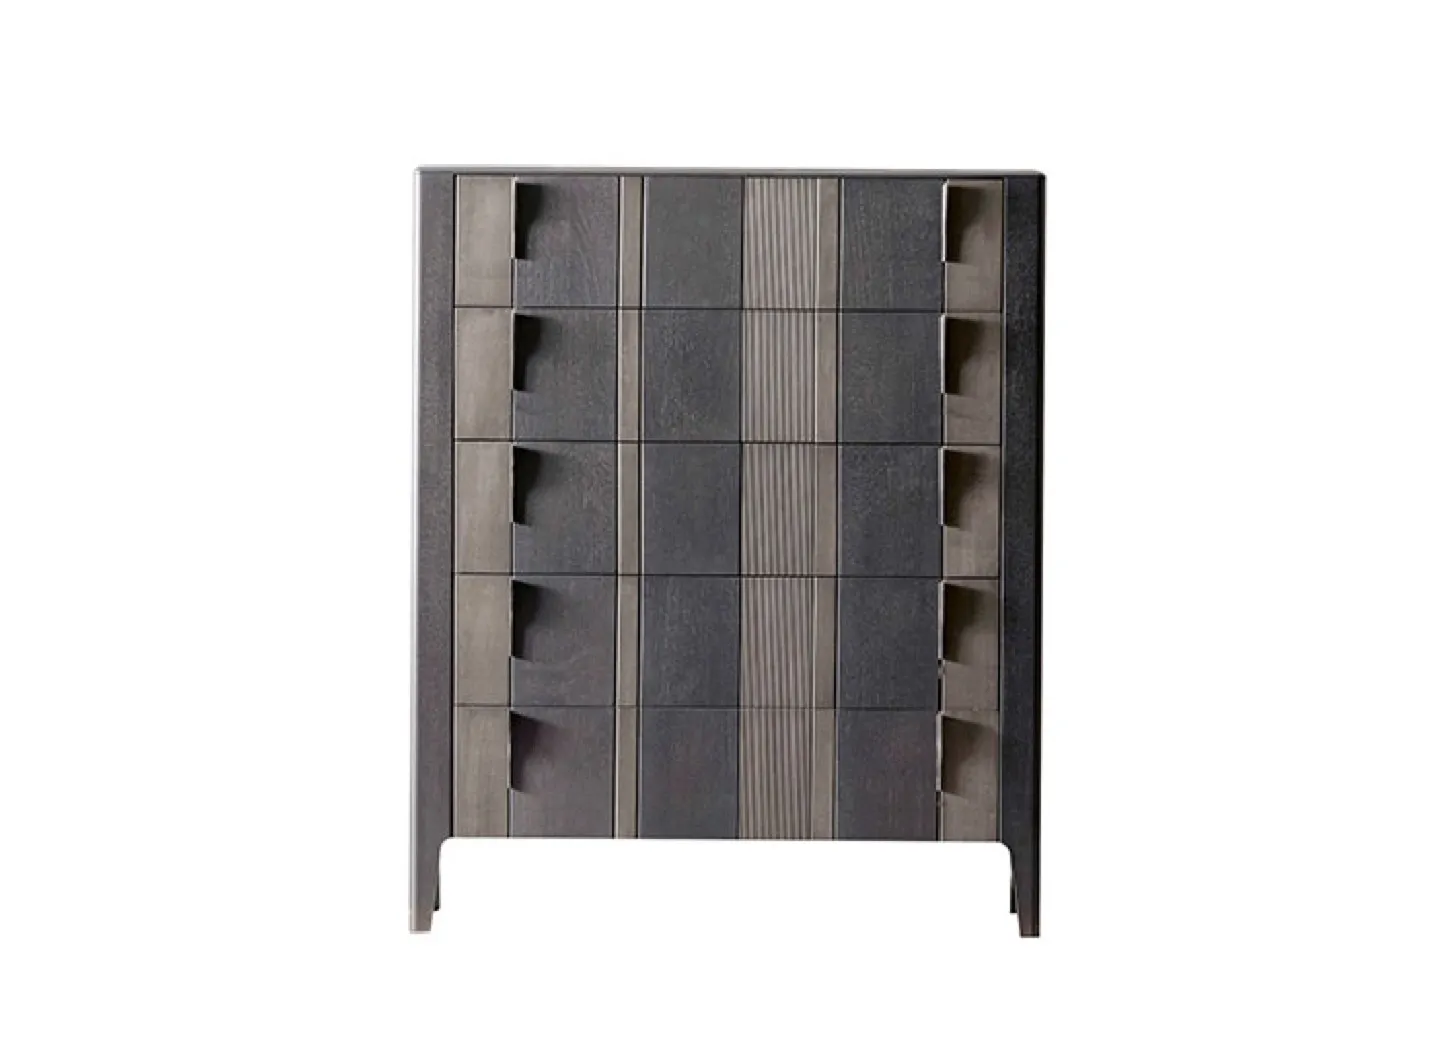 Domino chest of drawers